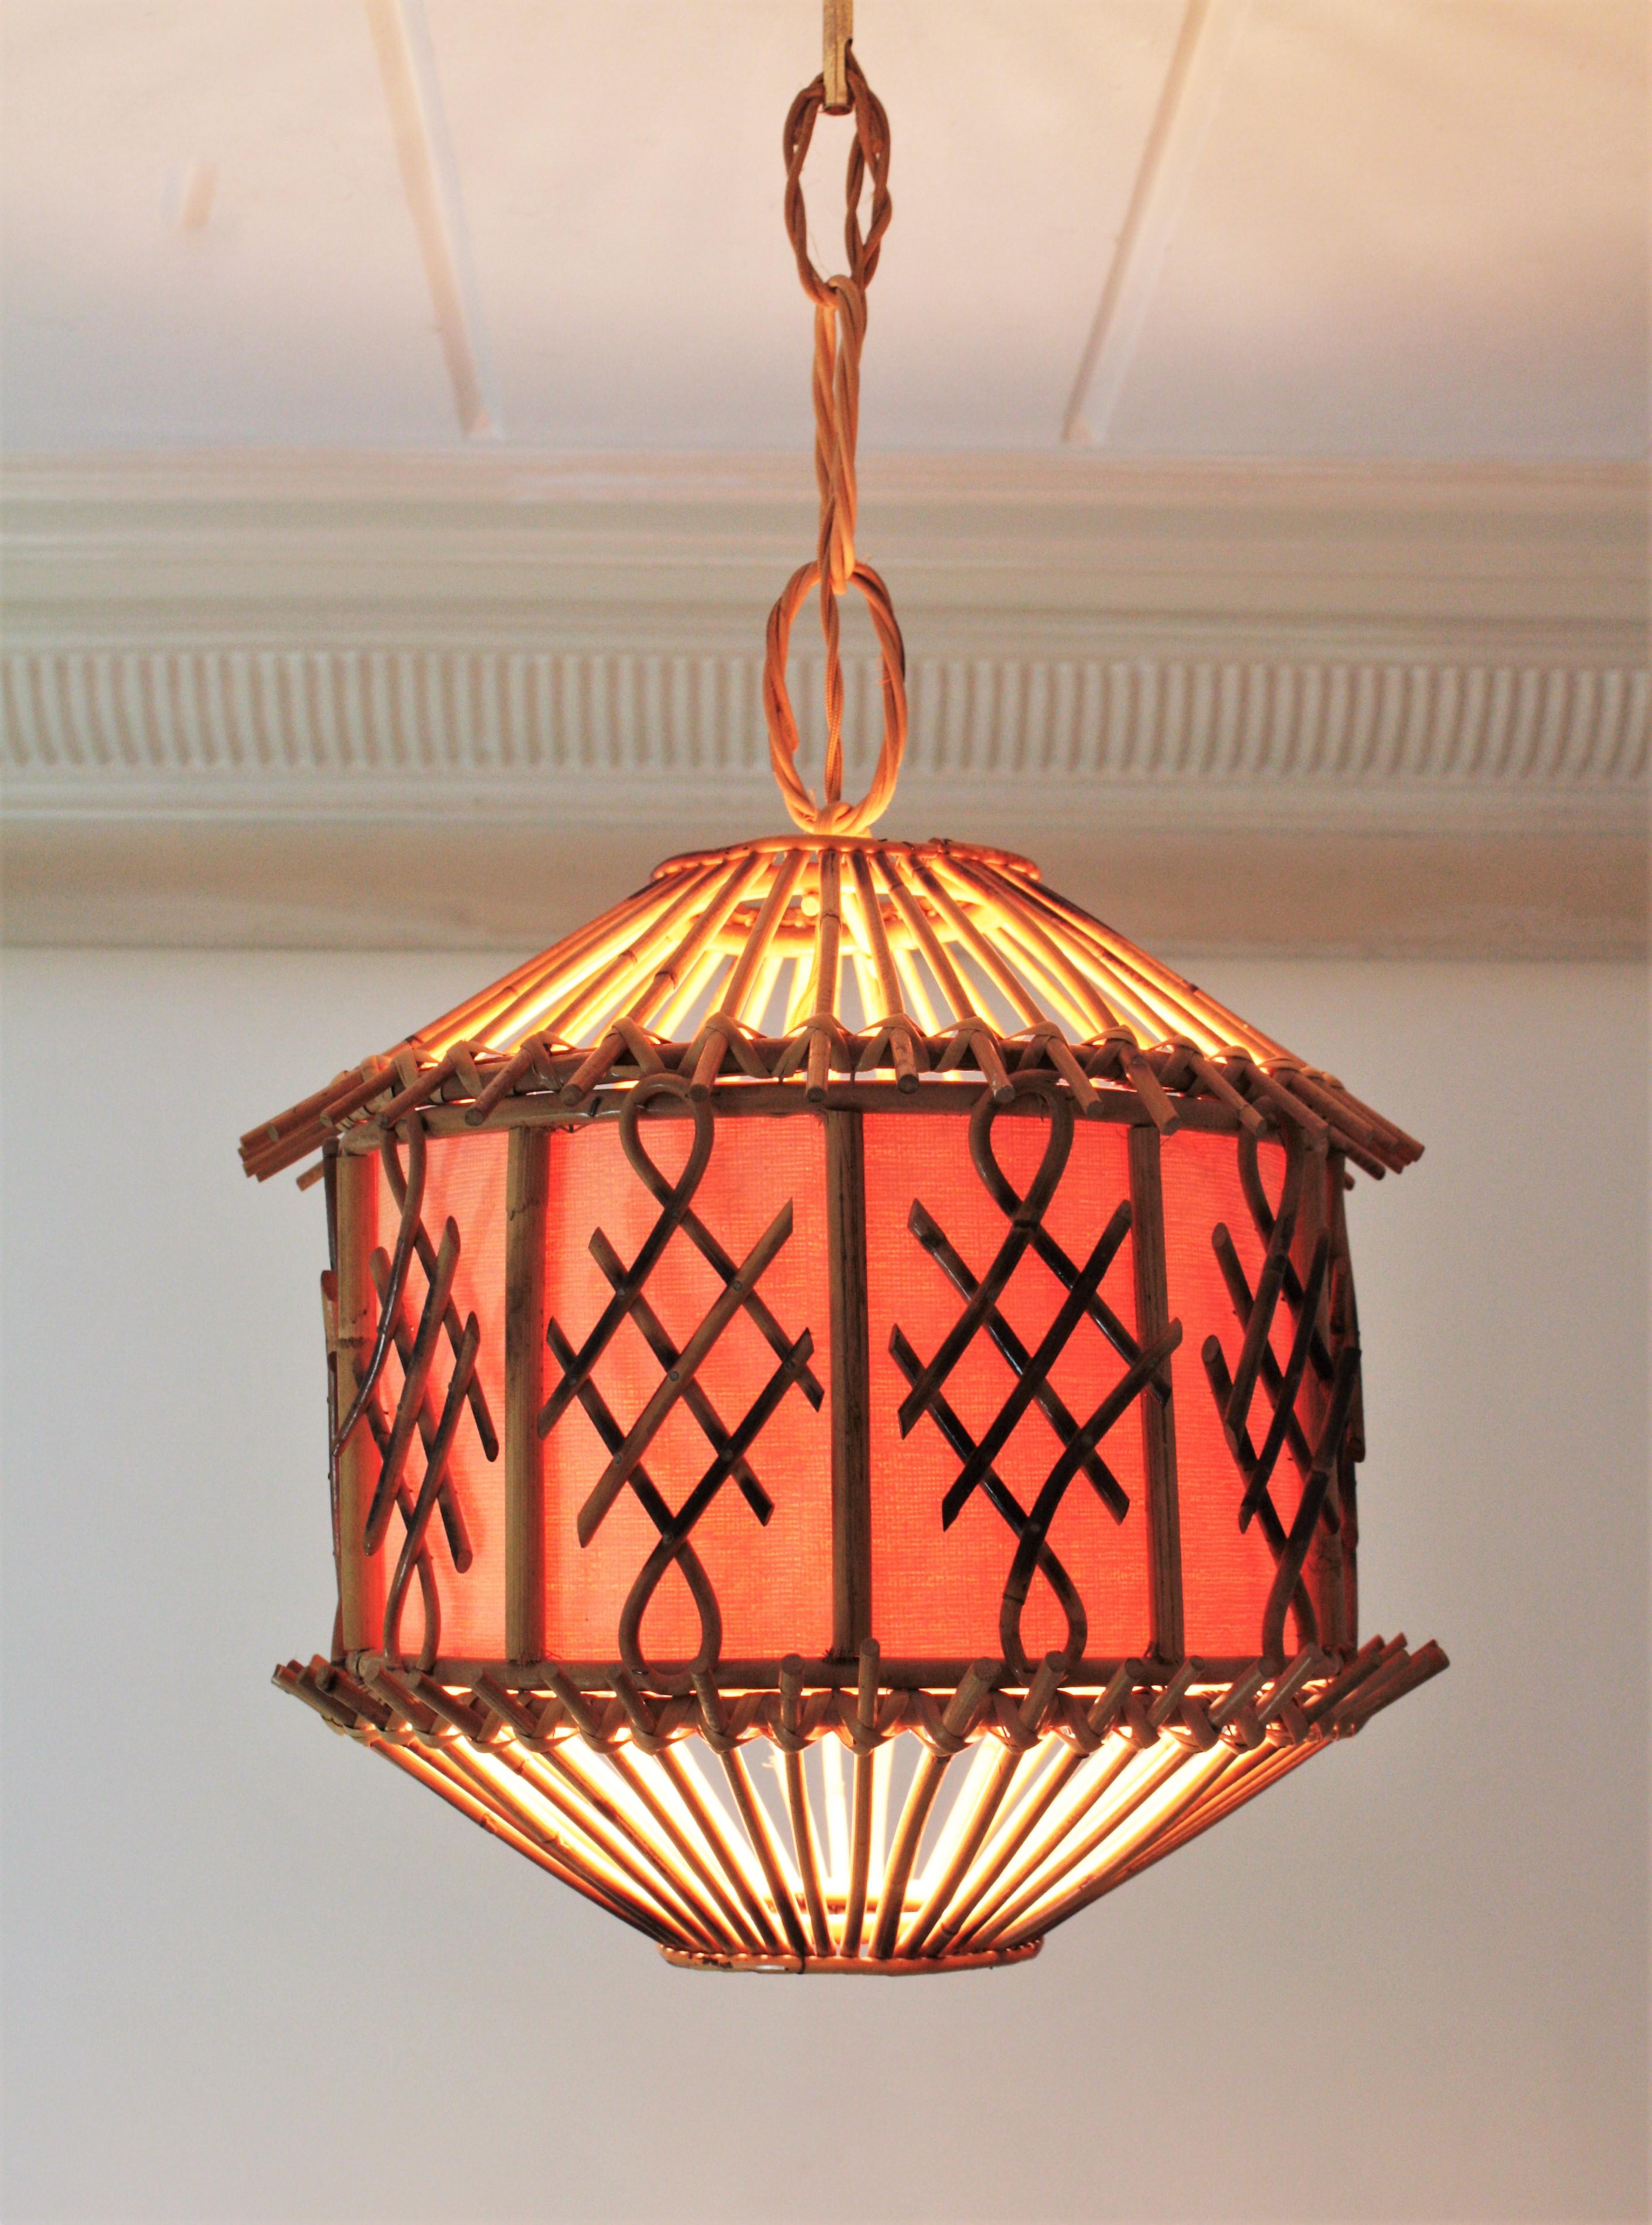 Mid-Century Modern rattan and wicker pendant or lantern accented by Oriental Details. France, 1950s-1960s.
This handcrafted ceiling lamp features a rattan pagoda shaped lantern with chinoiserie decorations and an inner paper shade. It hans from a